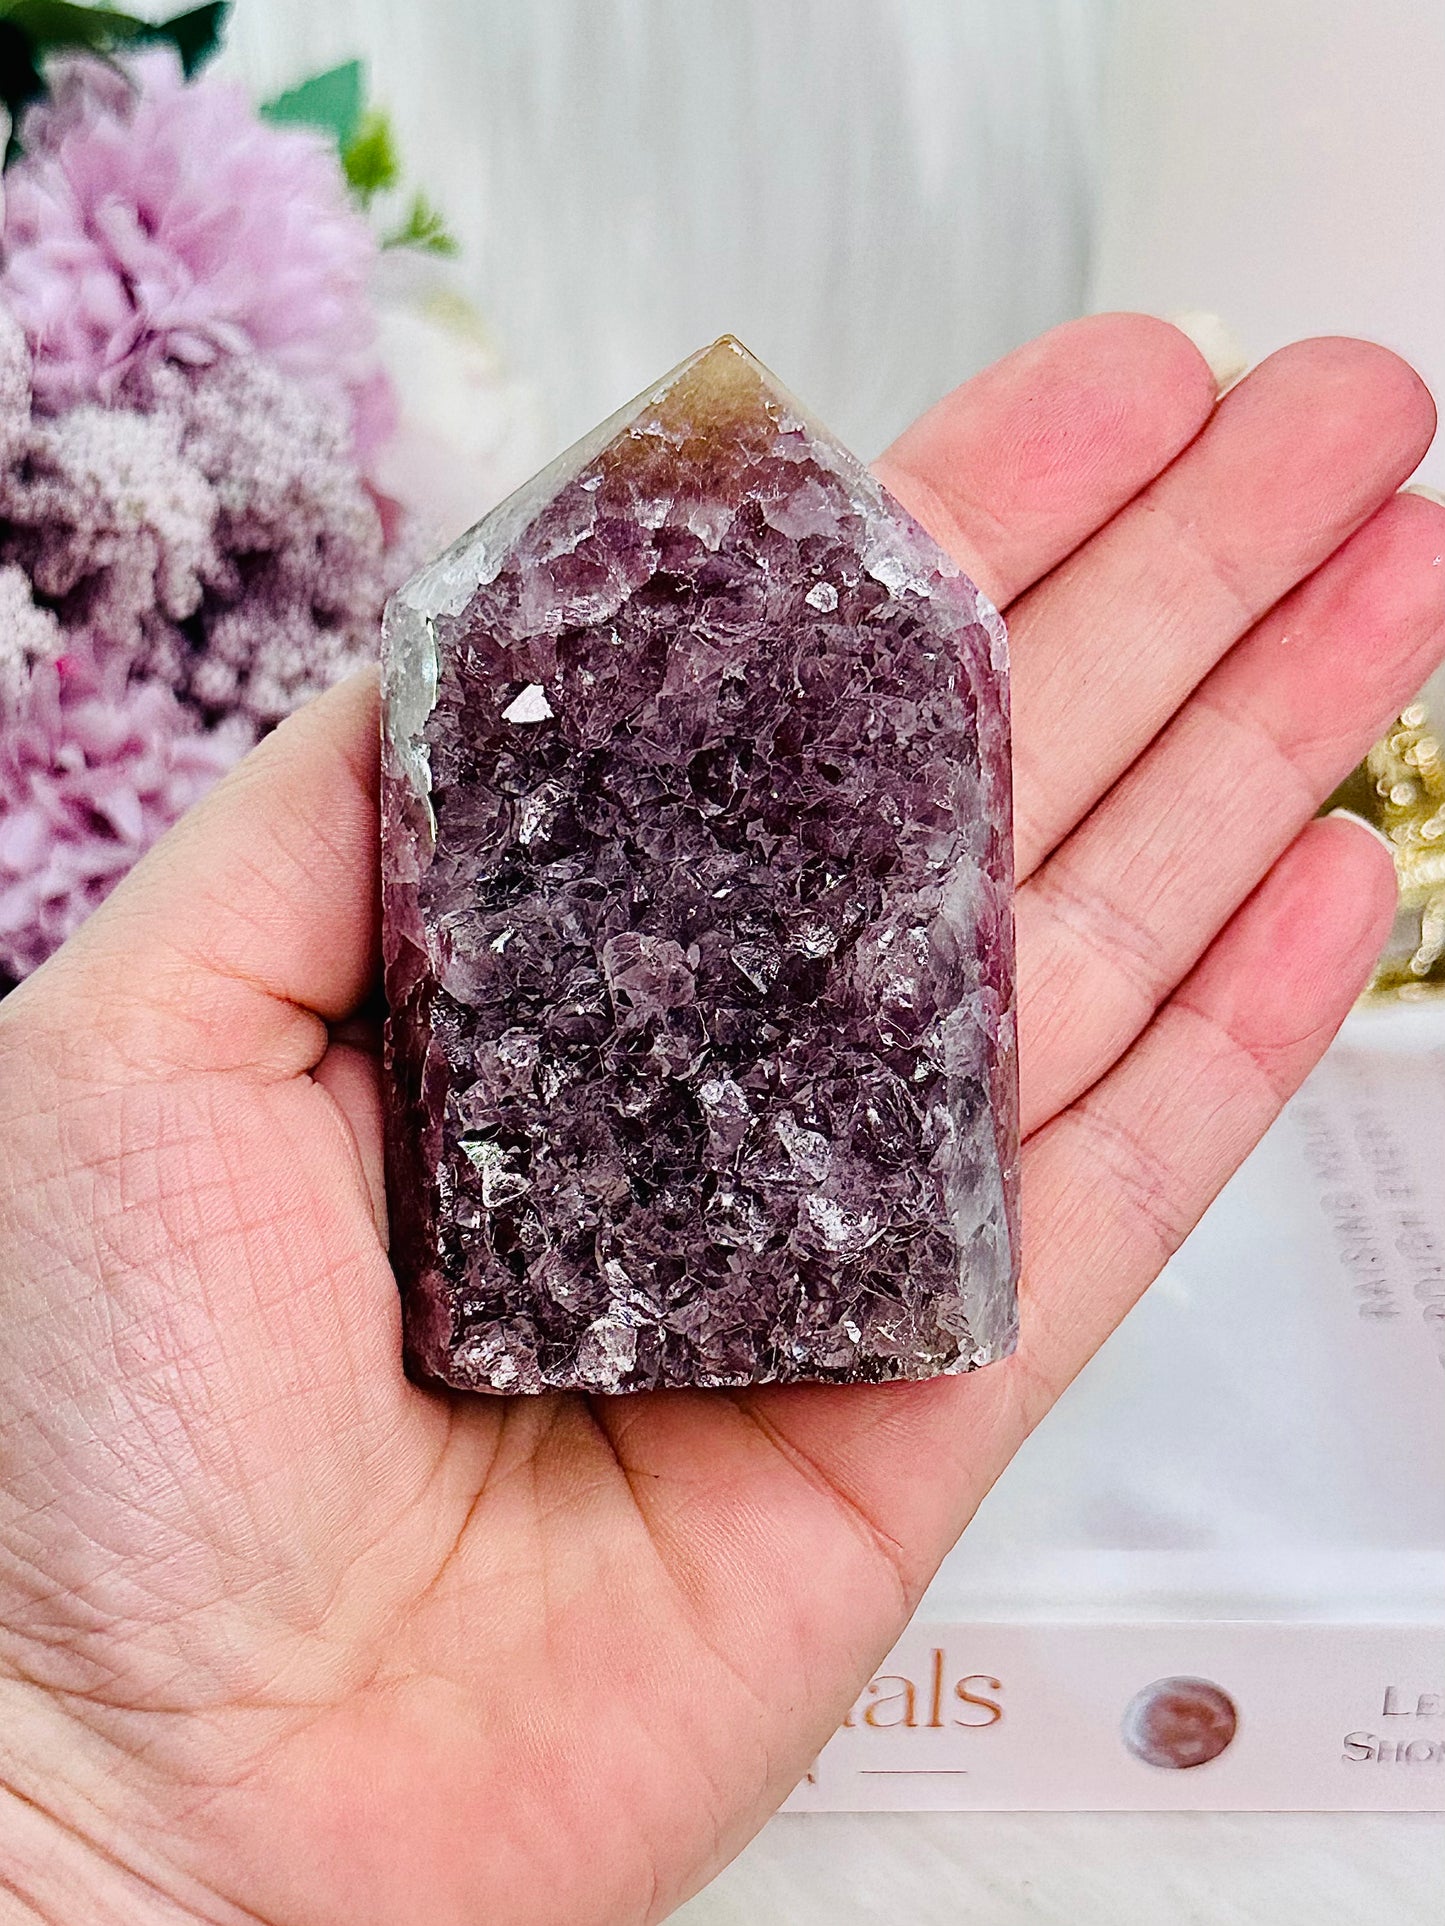 Super Stunning Chunky Amethyst Cluster Agate Tower From Brazil